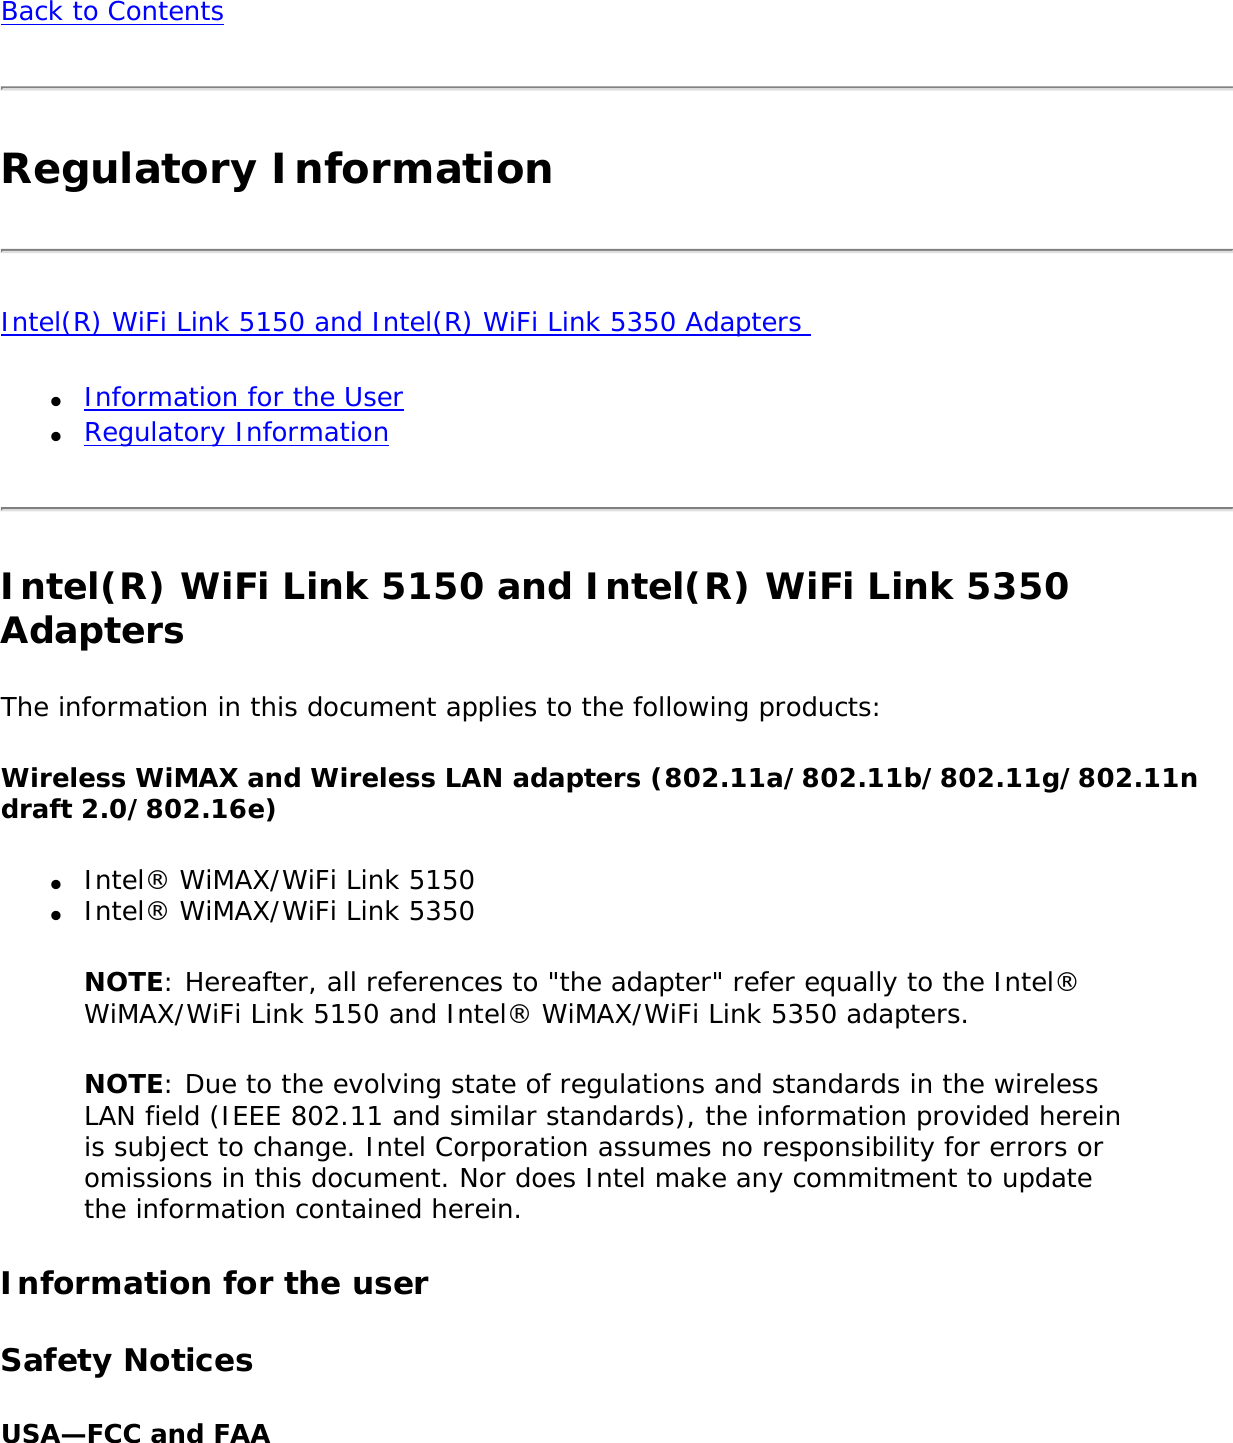 Back to ContentsRegulatory InformationIntel(R) WiFi Link 5150 and Intel(R) WiFi Link 5350 Adapters ●     Information for the User●     Regulatory InformationIntel(R) WiFi Link 5150 and Intel(R) WiFi Link 5350 Adapters The information in this document applies to the following products: Wireless WiMAX and Wireless LAN adapters (802.11a/802.11b/802.11g/802.11n draft 2.0/802.16e) ●     Intel® WiMAX/WiFi Link 5150●     Intel® WiMAX/WiFi Link 5350NOTE: Hereafter, all references to &quot;the adapter&quot; refer equally to the Intel® WiMAX/WiFi Link 5150 and Intel® WiMAX/WiFi Link 5350 adapters. NOTE: Due to the evolving state of regulations and standards in the wireless LAN field (IEEE 802.11 and similar standards), the information provided herein is subject to change. Intel Corporation assumes no responsibility for errors or omissions in this document. Nor does Intel make any commitment to update the information contained herein.Information for the userSafety NoticesUSA—FCC and FAA